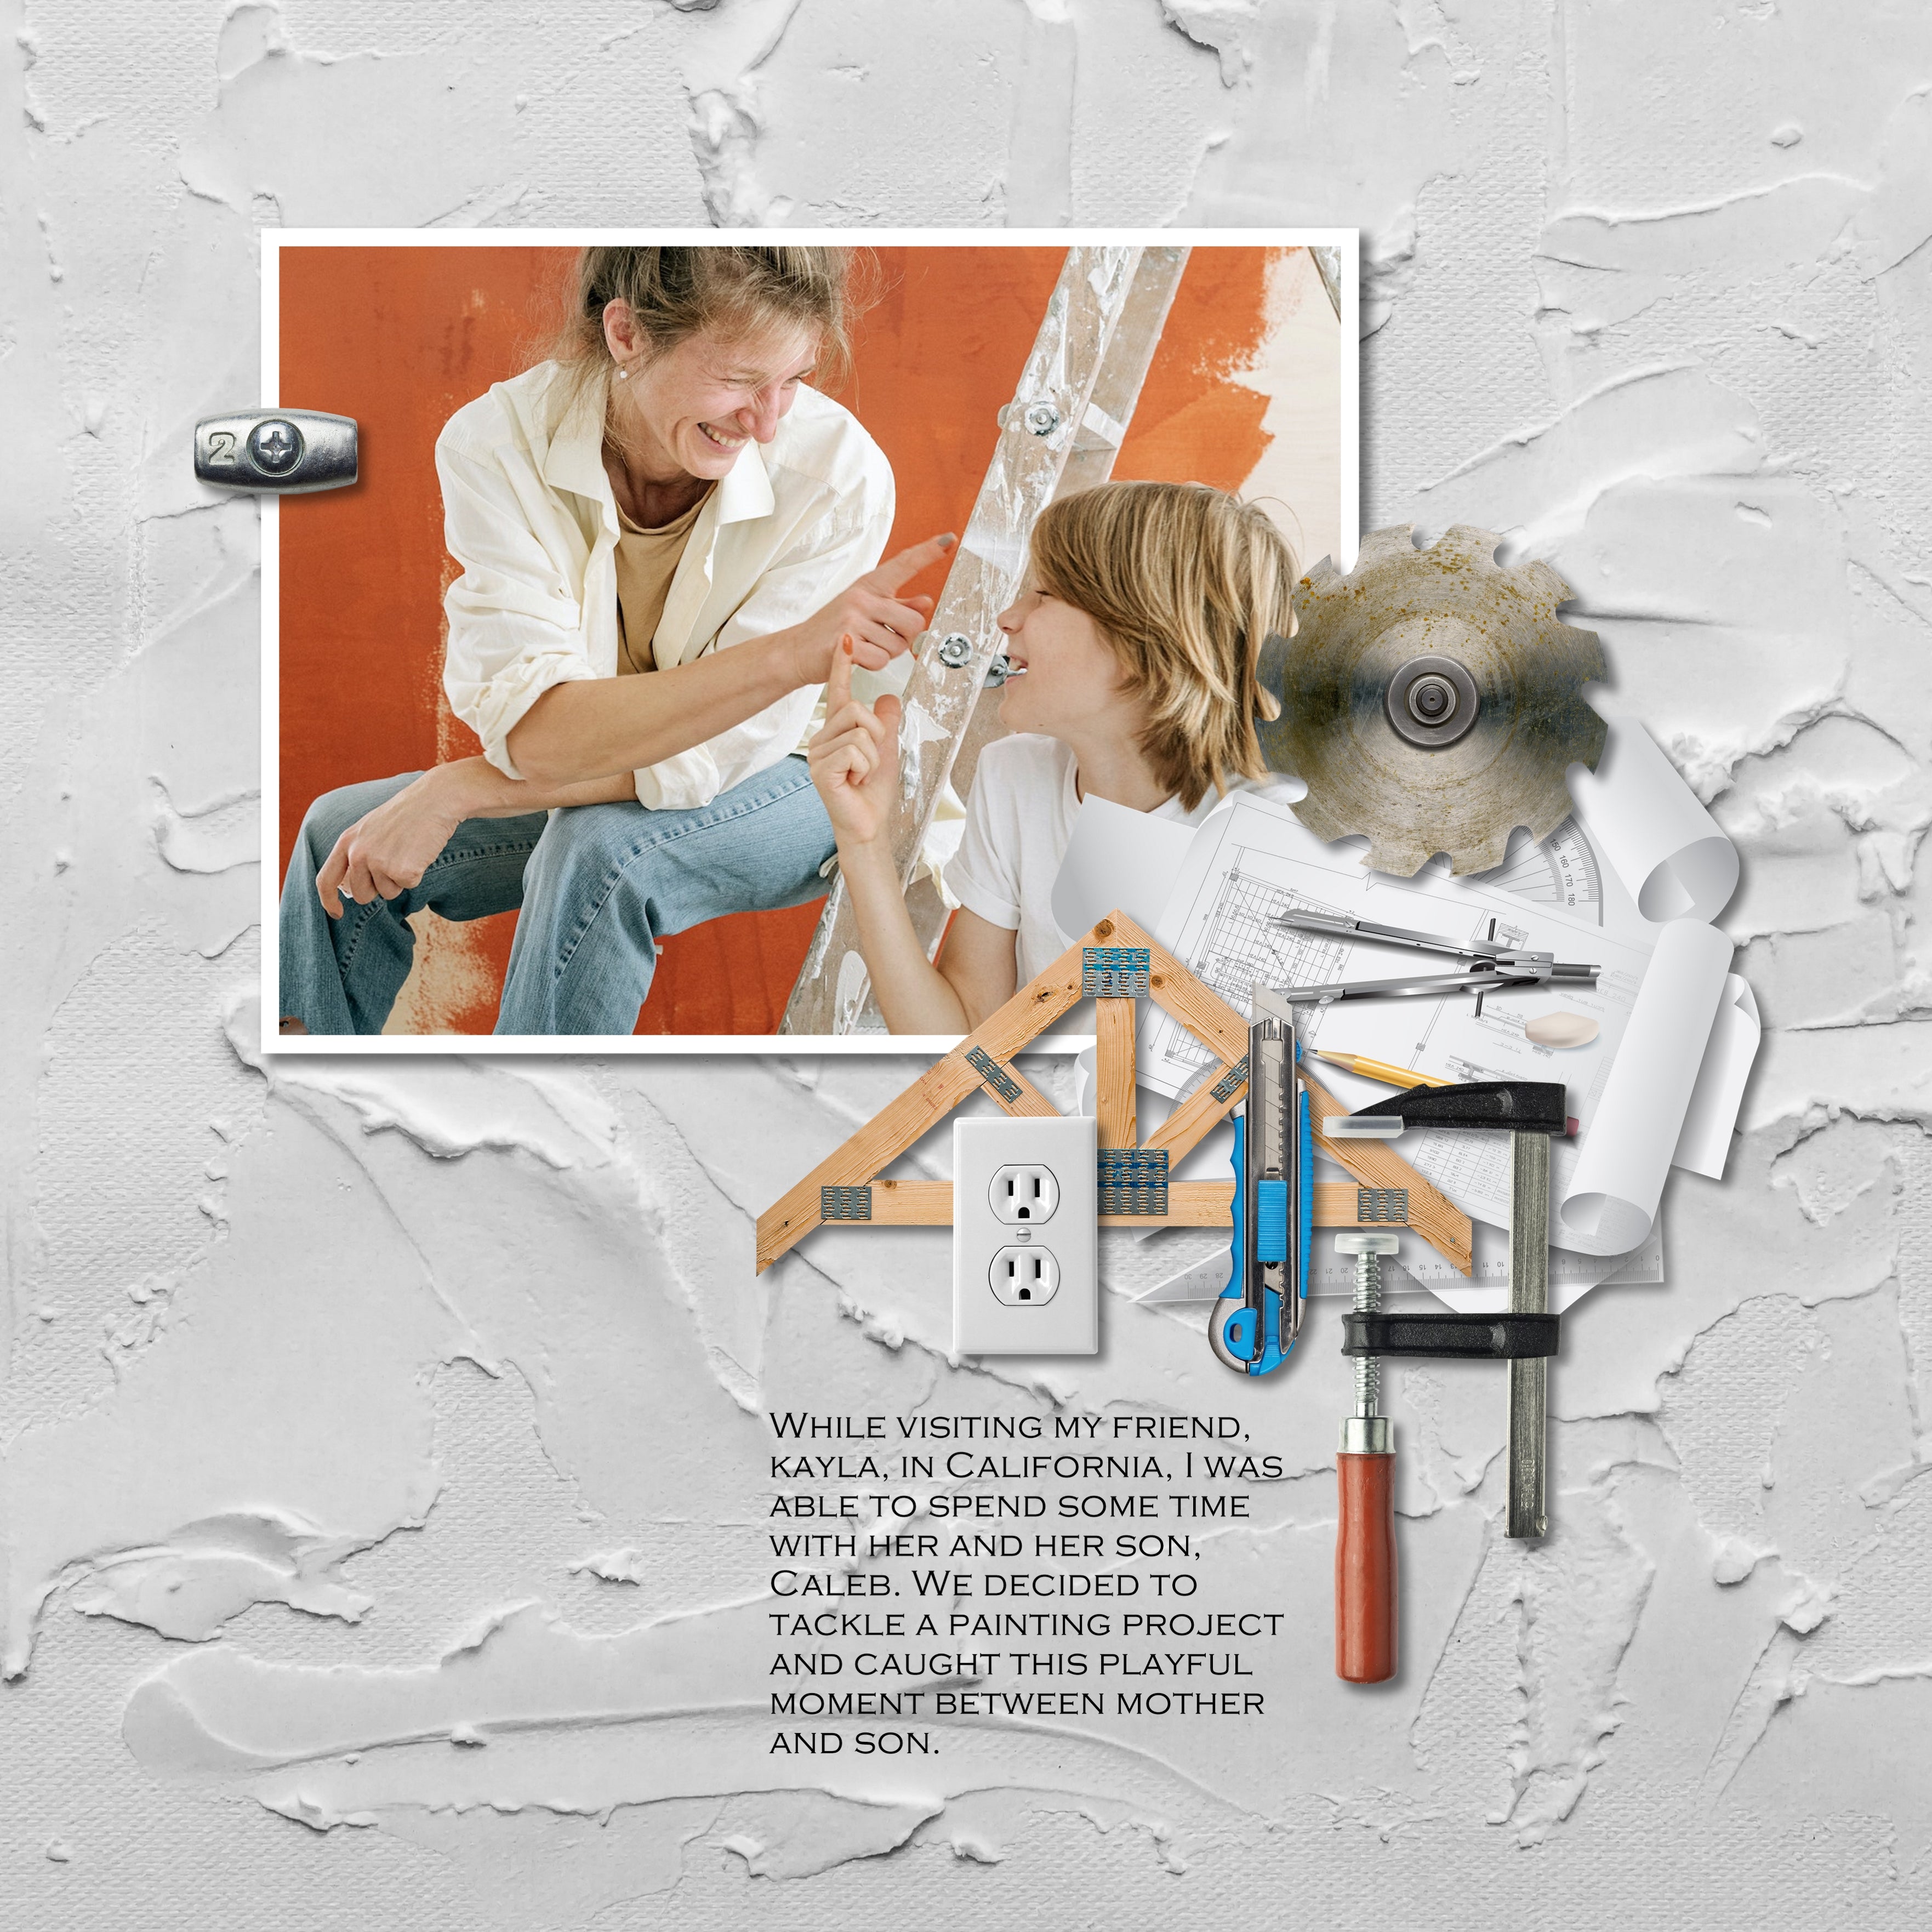 Get ready for some home improvement and remodeling with this Home Renovation digital art elements only kit. Perfect for documenting building a new home, renovations around your house, house painting, interior decorating, handyman work, architects, builders, interior designers, draftsmen, electricians, plumbers, construction, and more.